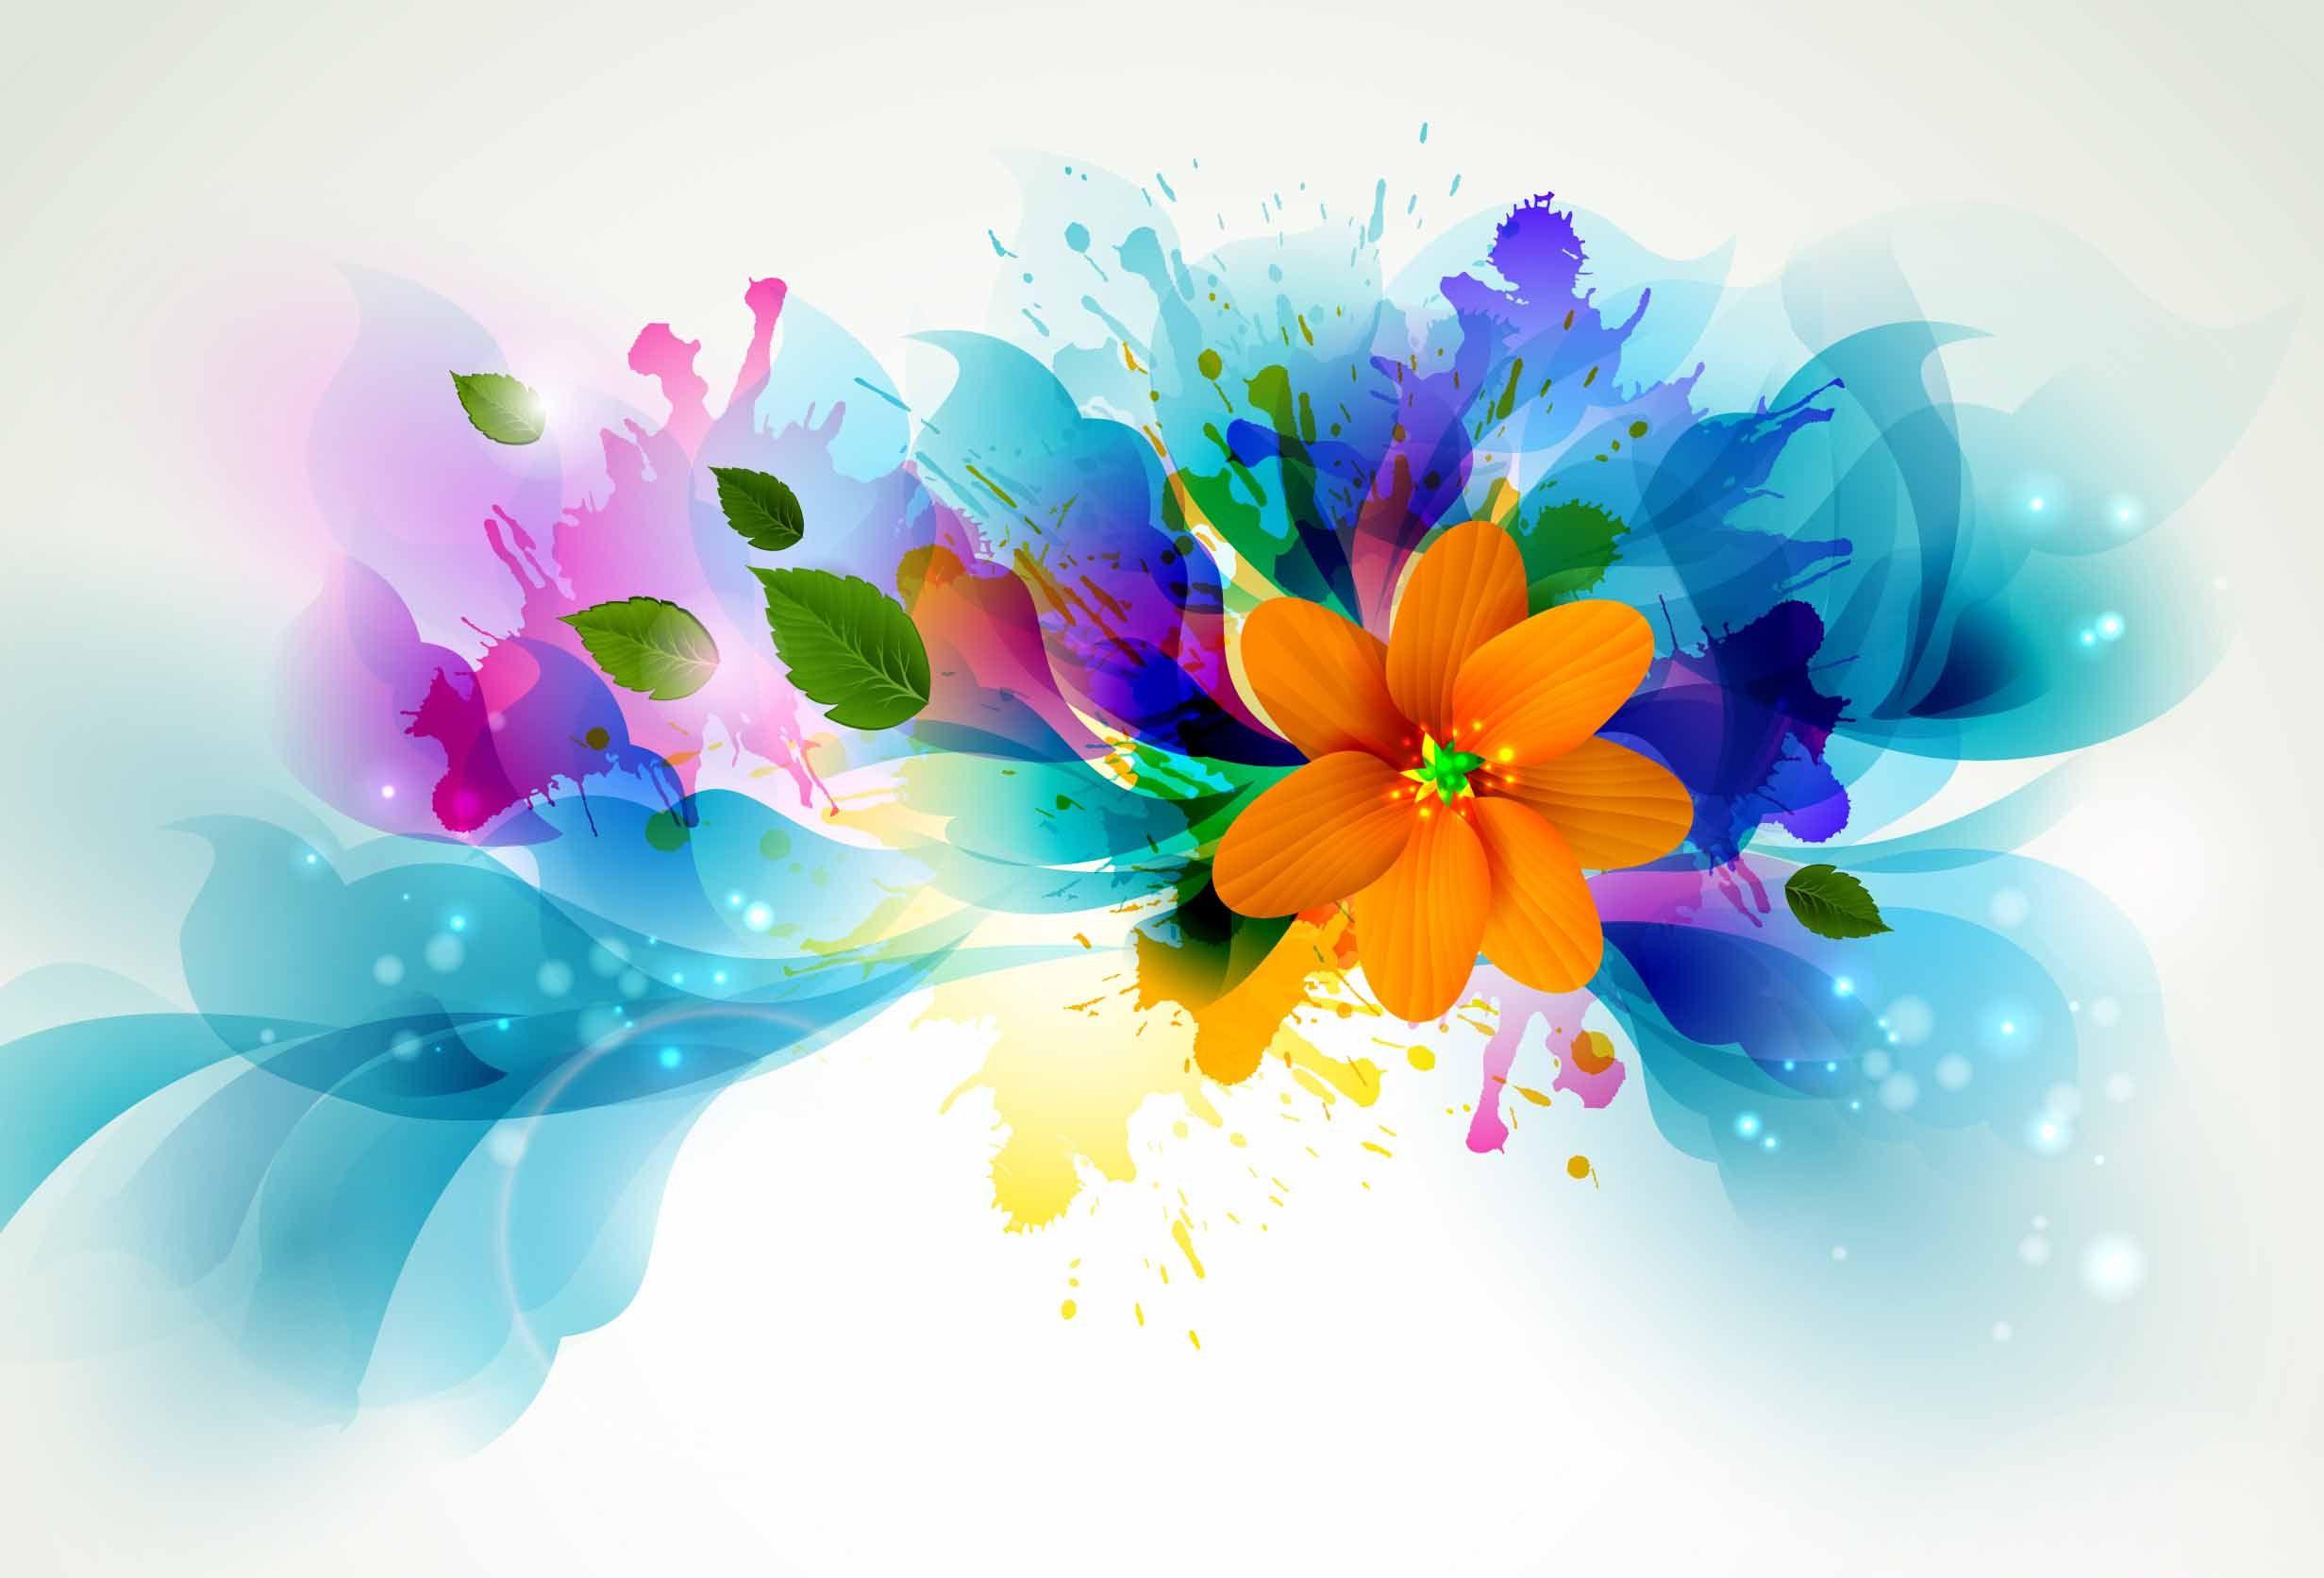 Beautiful Flower Wallpaper Image For Download